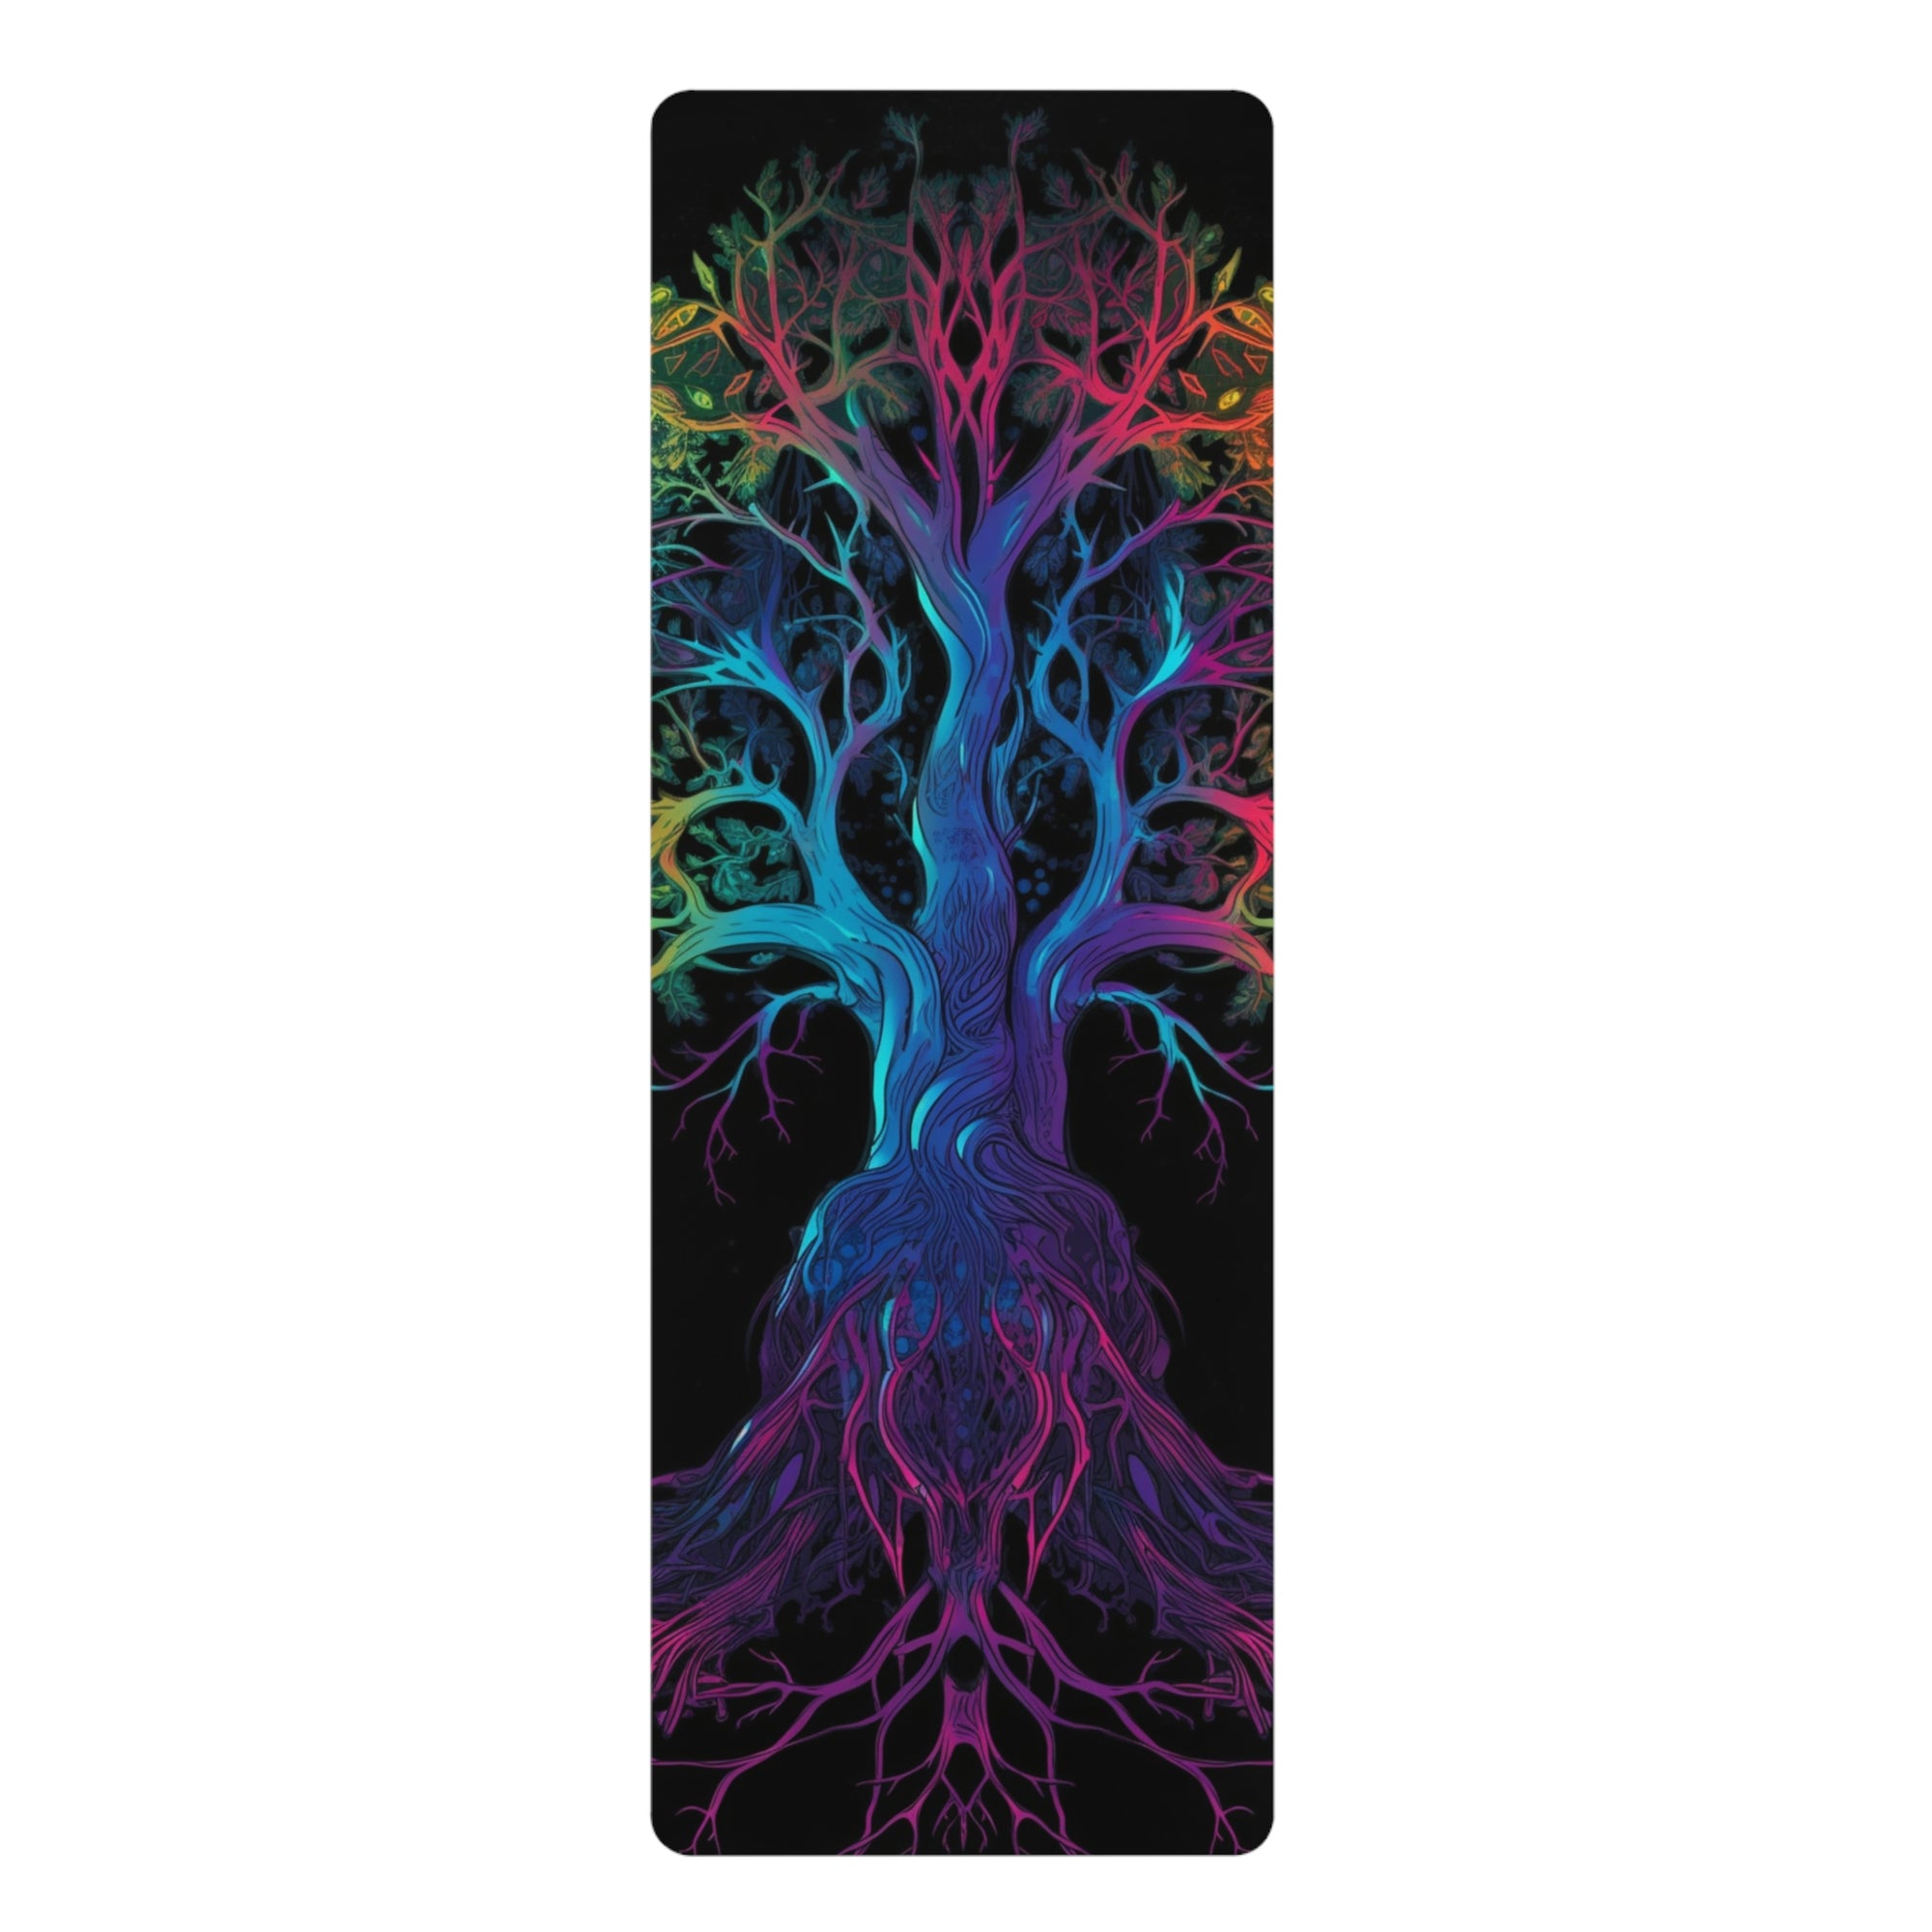 Neon Tree of Life Rubber Yoga Mat by IndiOdyssey